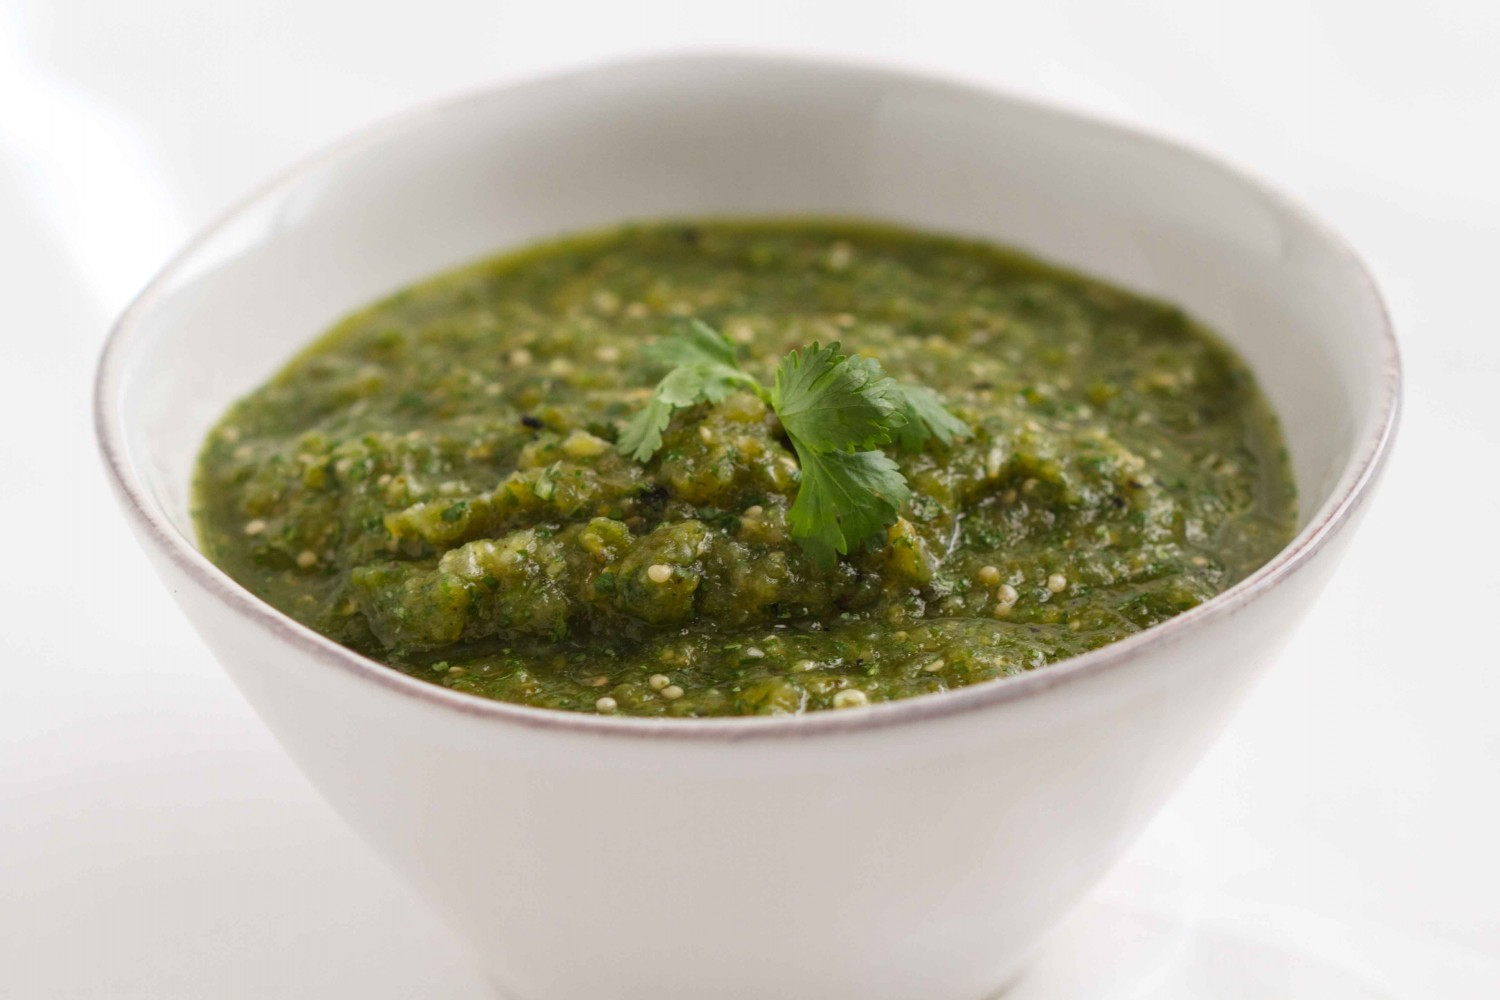 Roasted Tomatillo Salsa (Salsa Verde) and a Giveaway